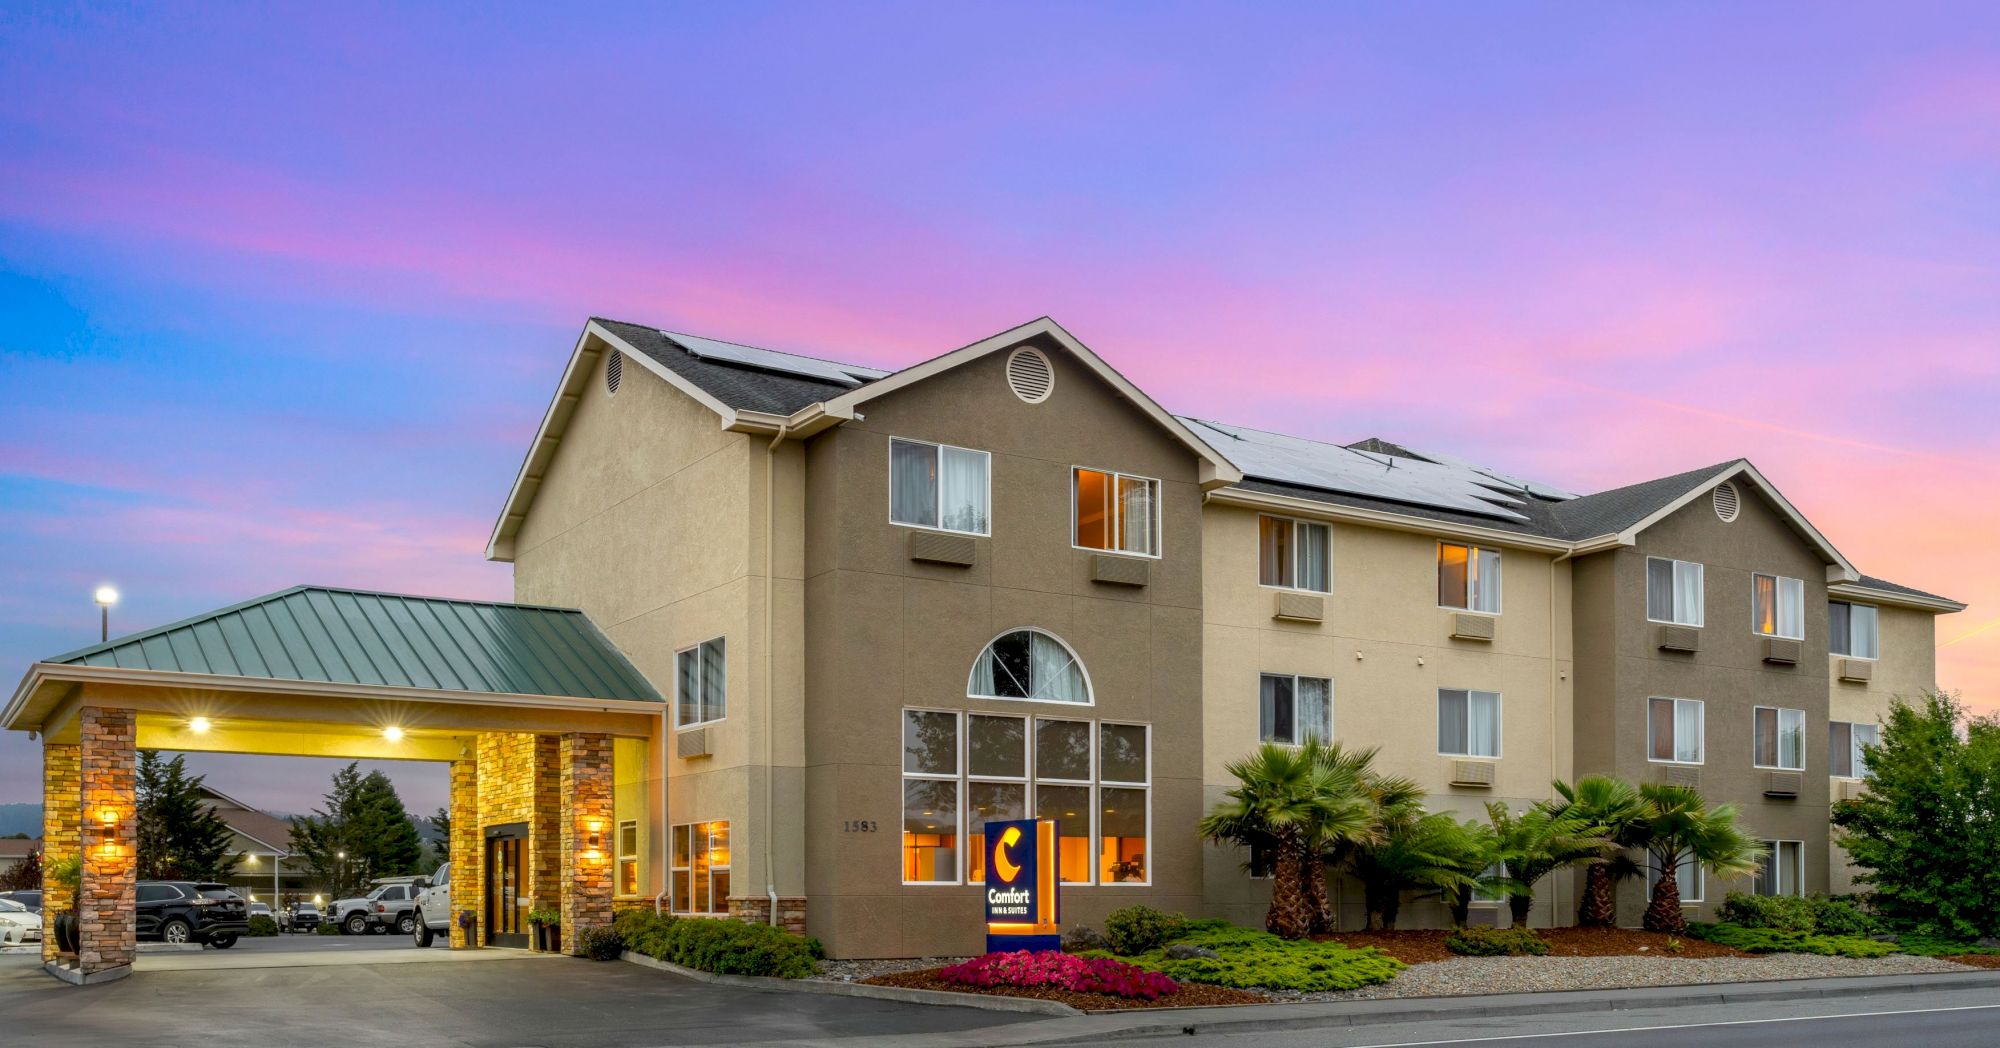 The image shows a three-story hotel building with the Comfort Inn logo, a portico, landscaped garden, and a vibrant sunset sky in the background.